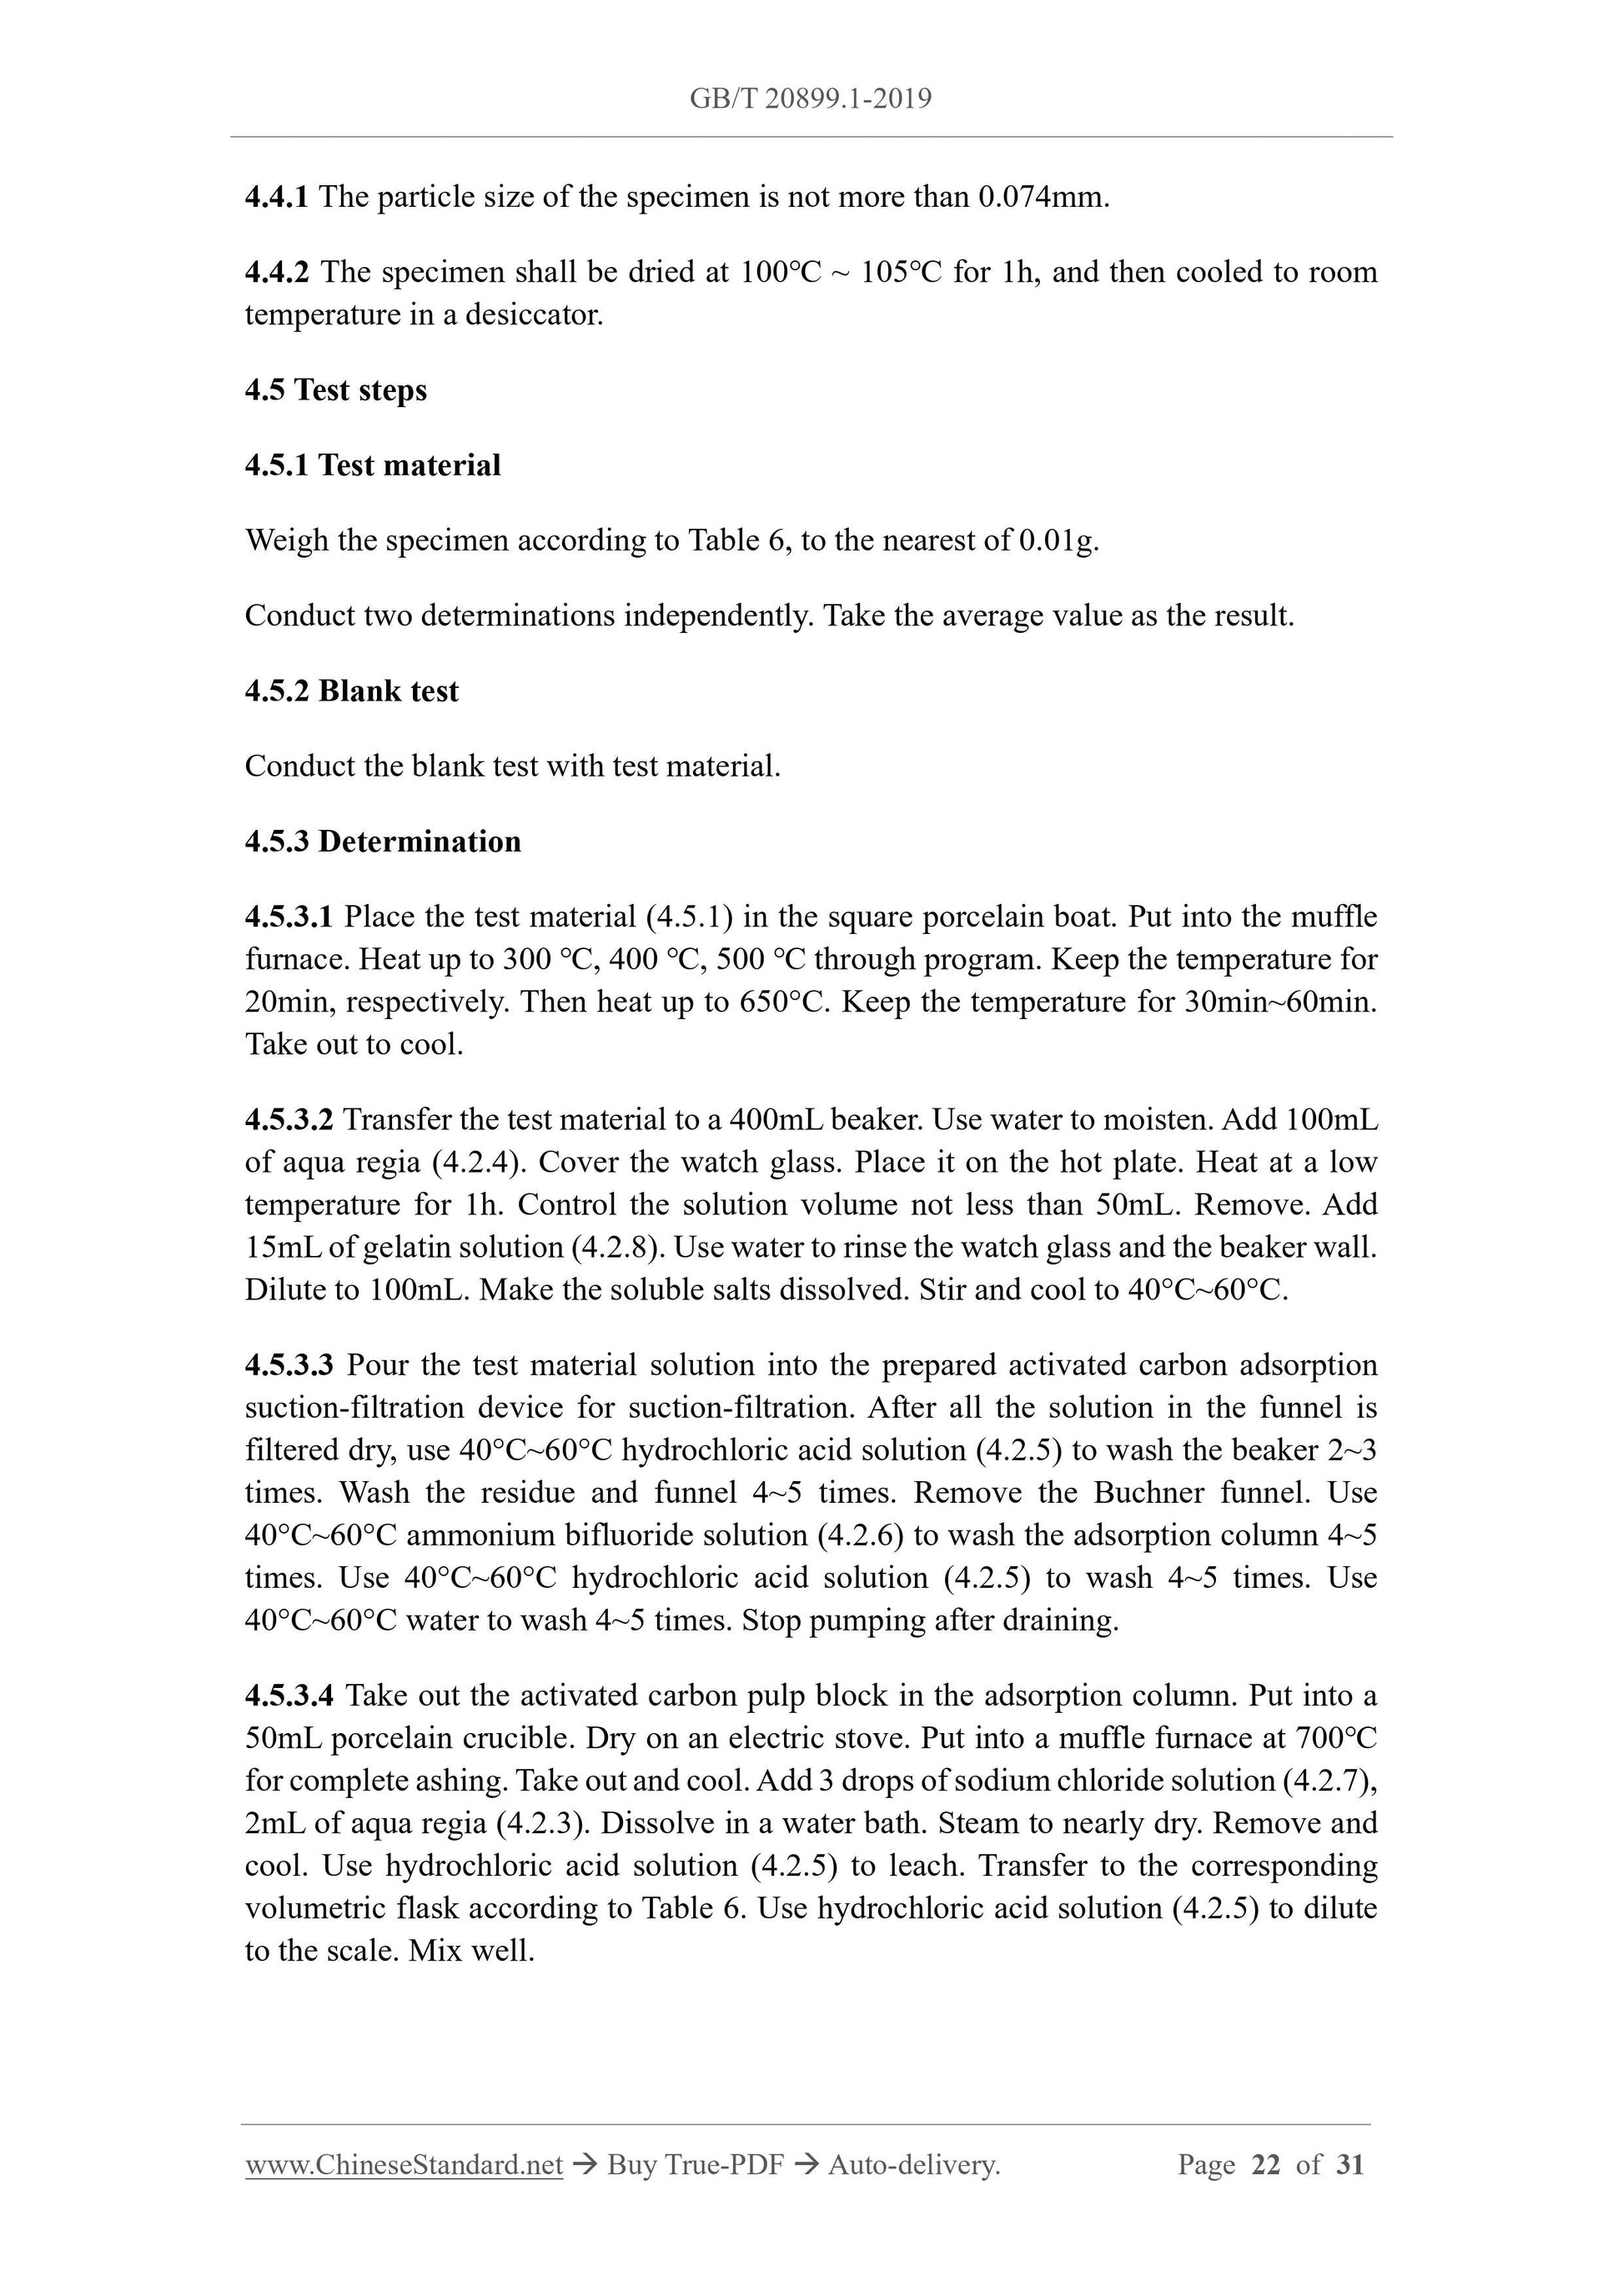 GB/T 20899.1-2019 Page 8